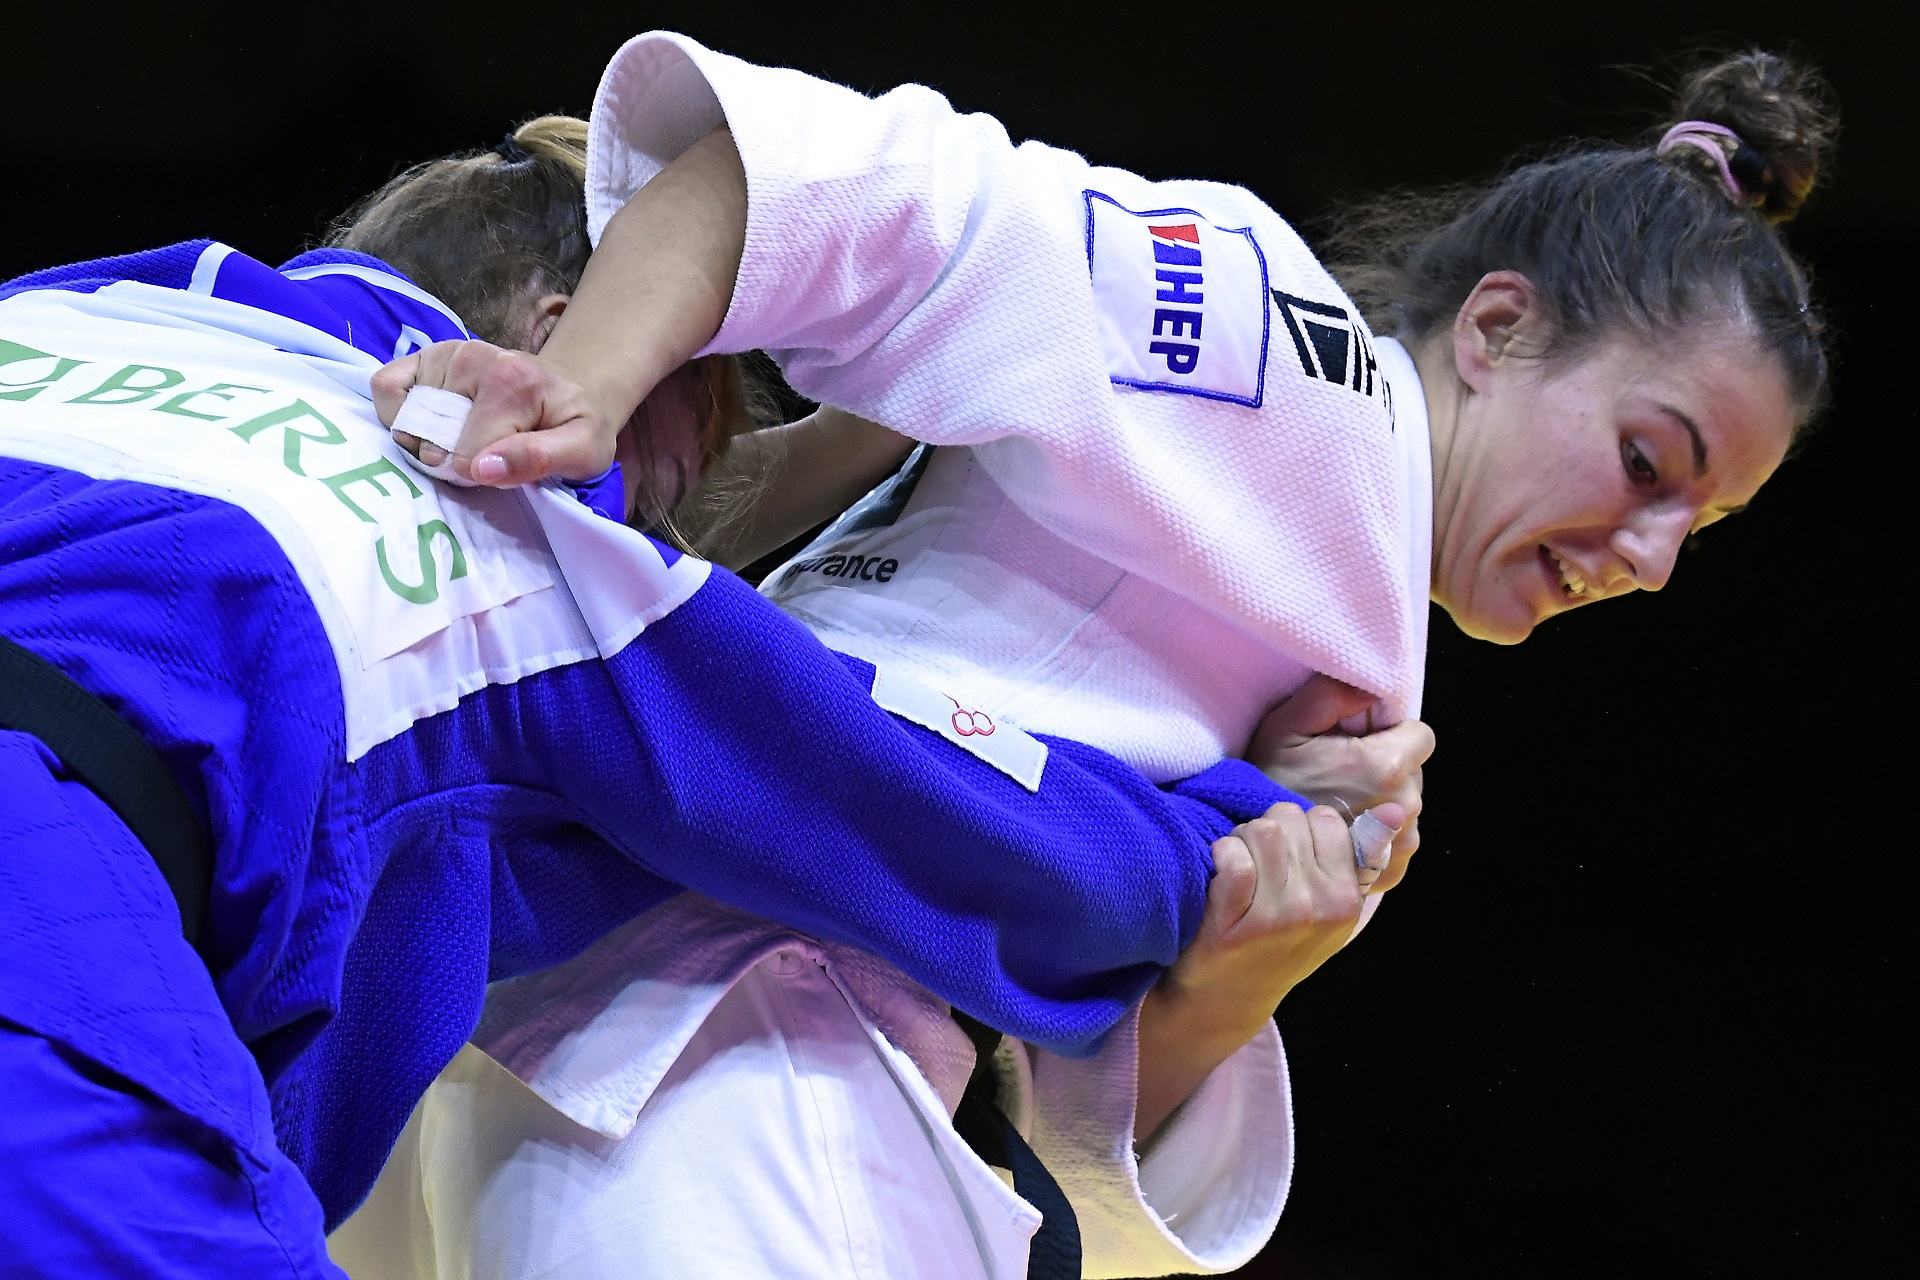 epa08772429 Barbara Matic of Croatia (in white) and Margaux Pinot of France fight in the women’s 70 kg category bout at the Judo Grand Slam at Papp Laszlo Budapest Sports Arena in Budapest, Hungary, 24 October 2020 (issued 25 October 2020).  EPA/Tamas Kovacs HUNGARY OUT